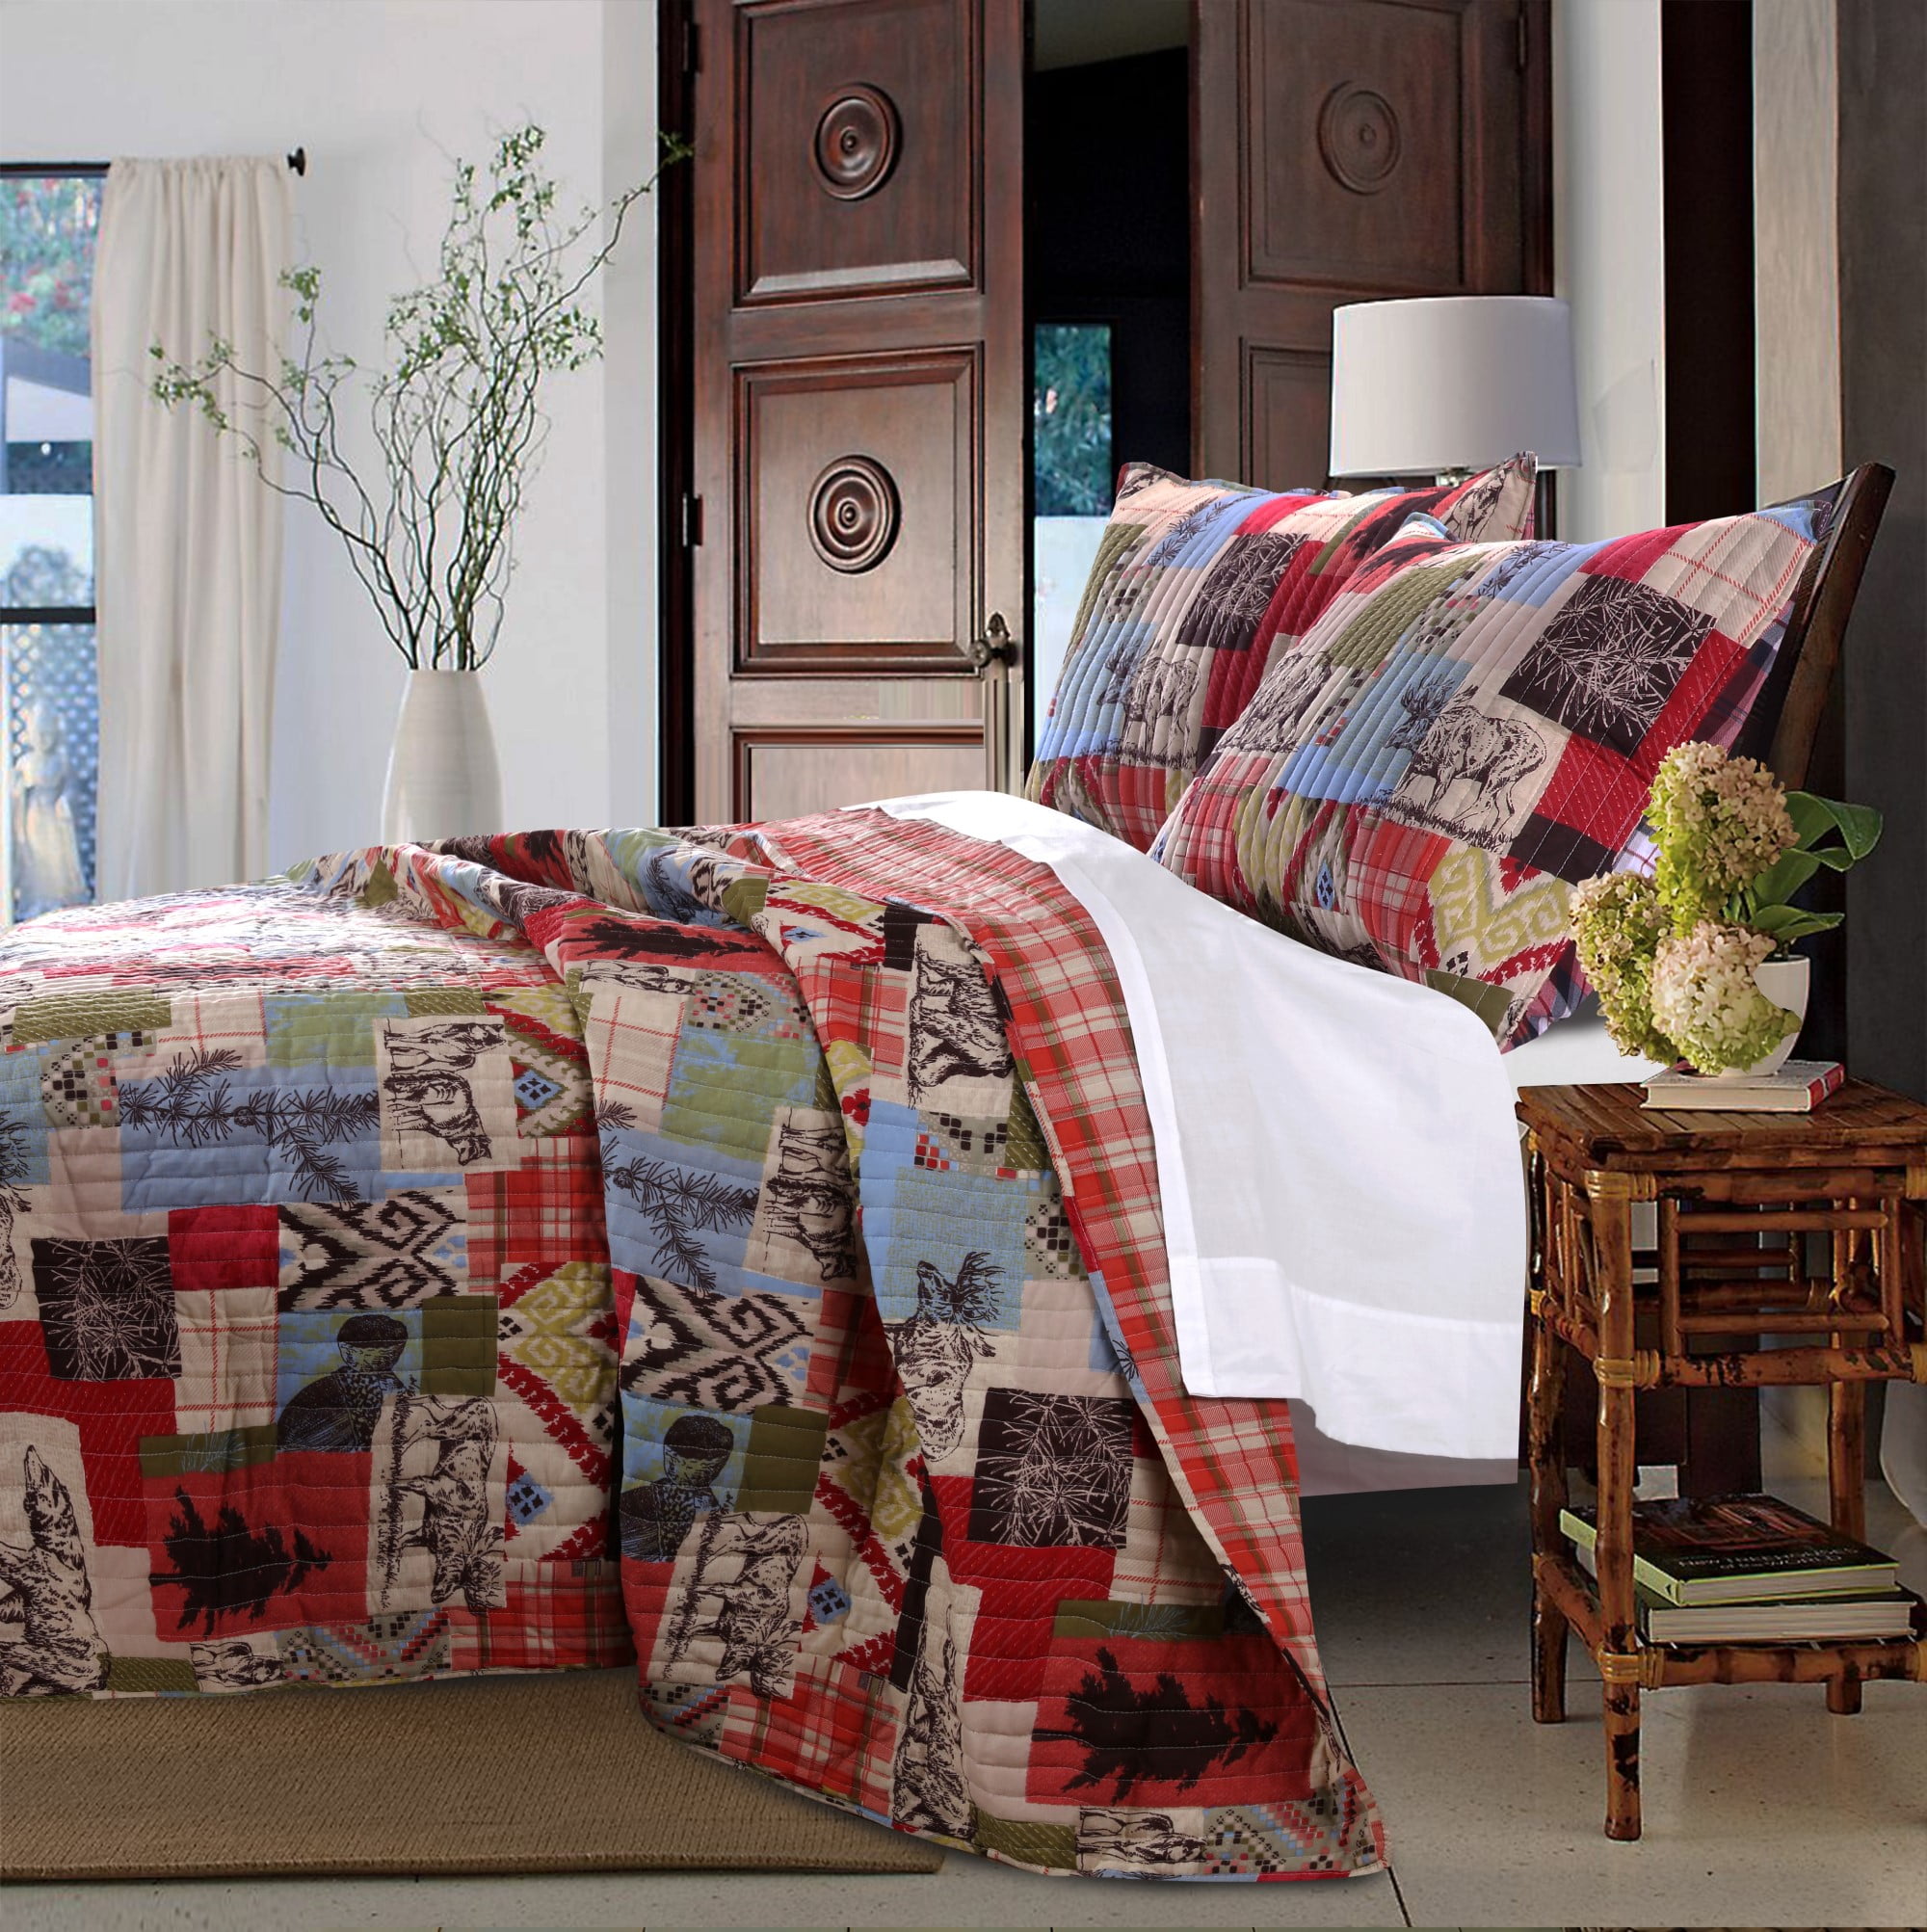 CABIN COUNTRY MOUNTAIN BEAR DEER FISH LAKE and LODGE 2pc Twin QUILT SET 